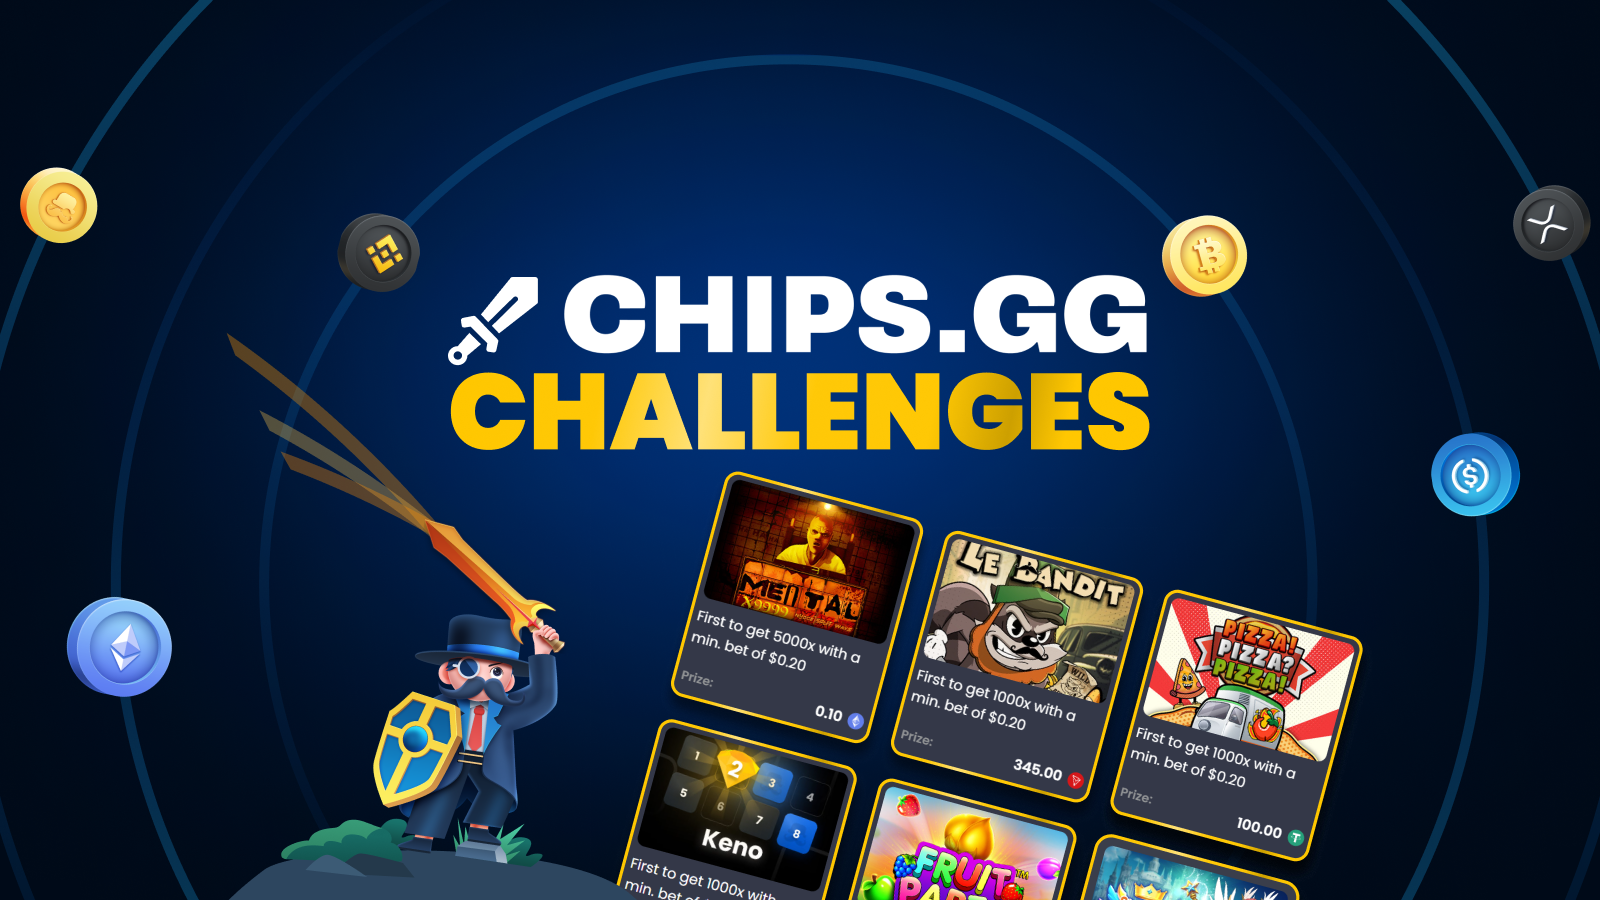 Chips.gg game challenges ad with prizes, the chips mascot, and crypto icons.